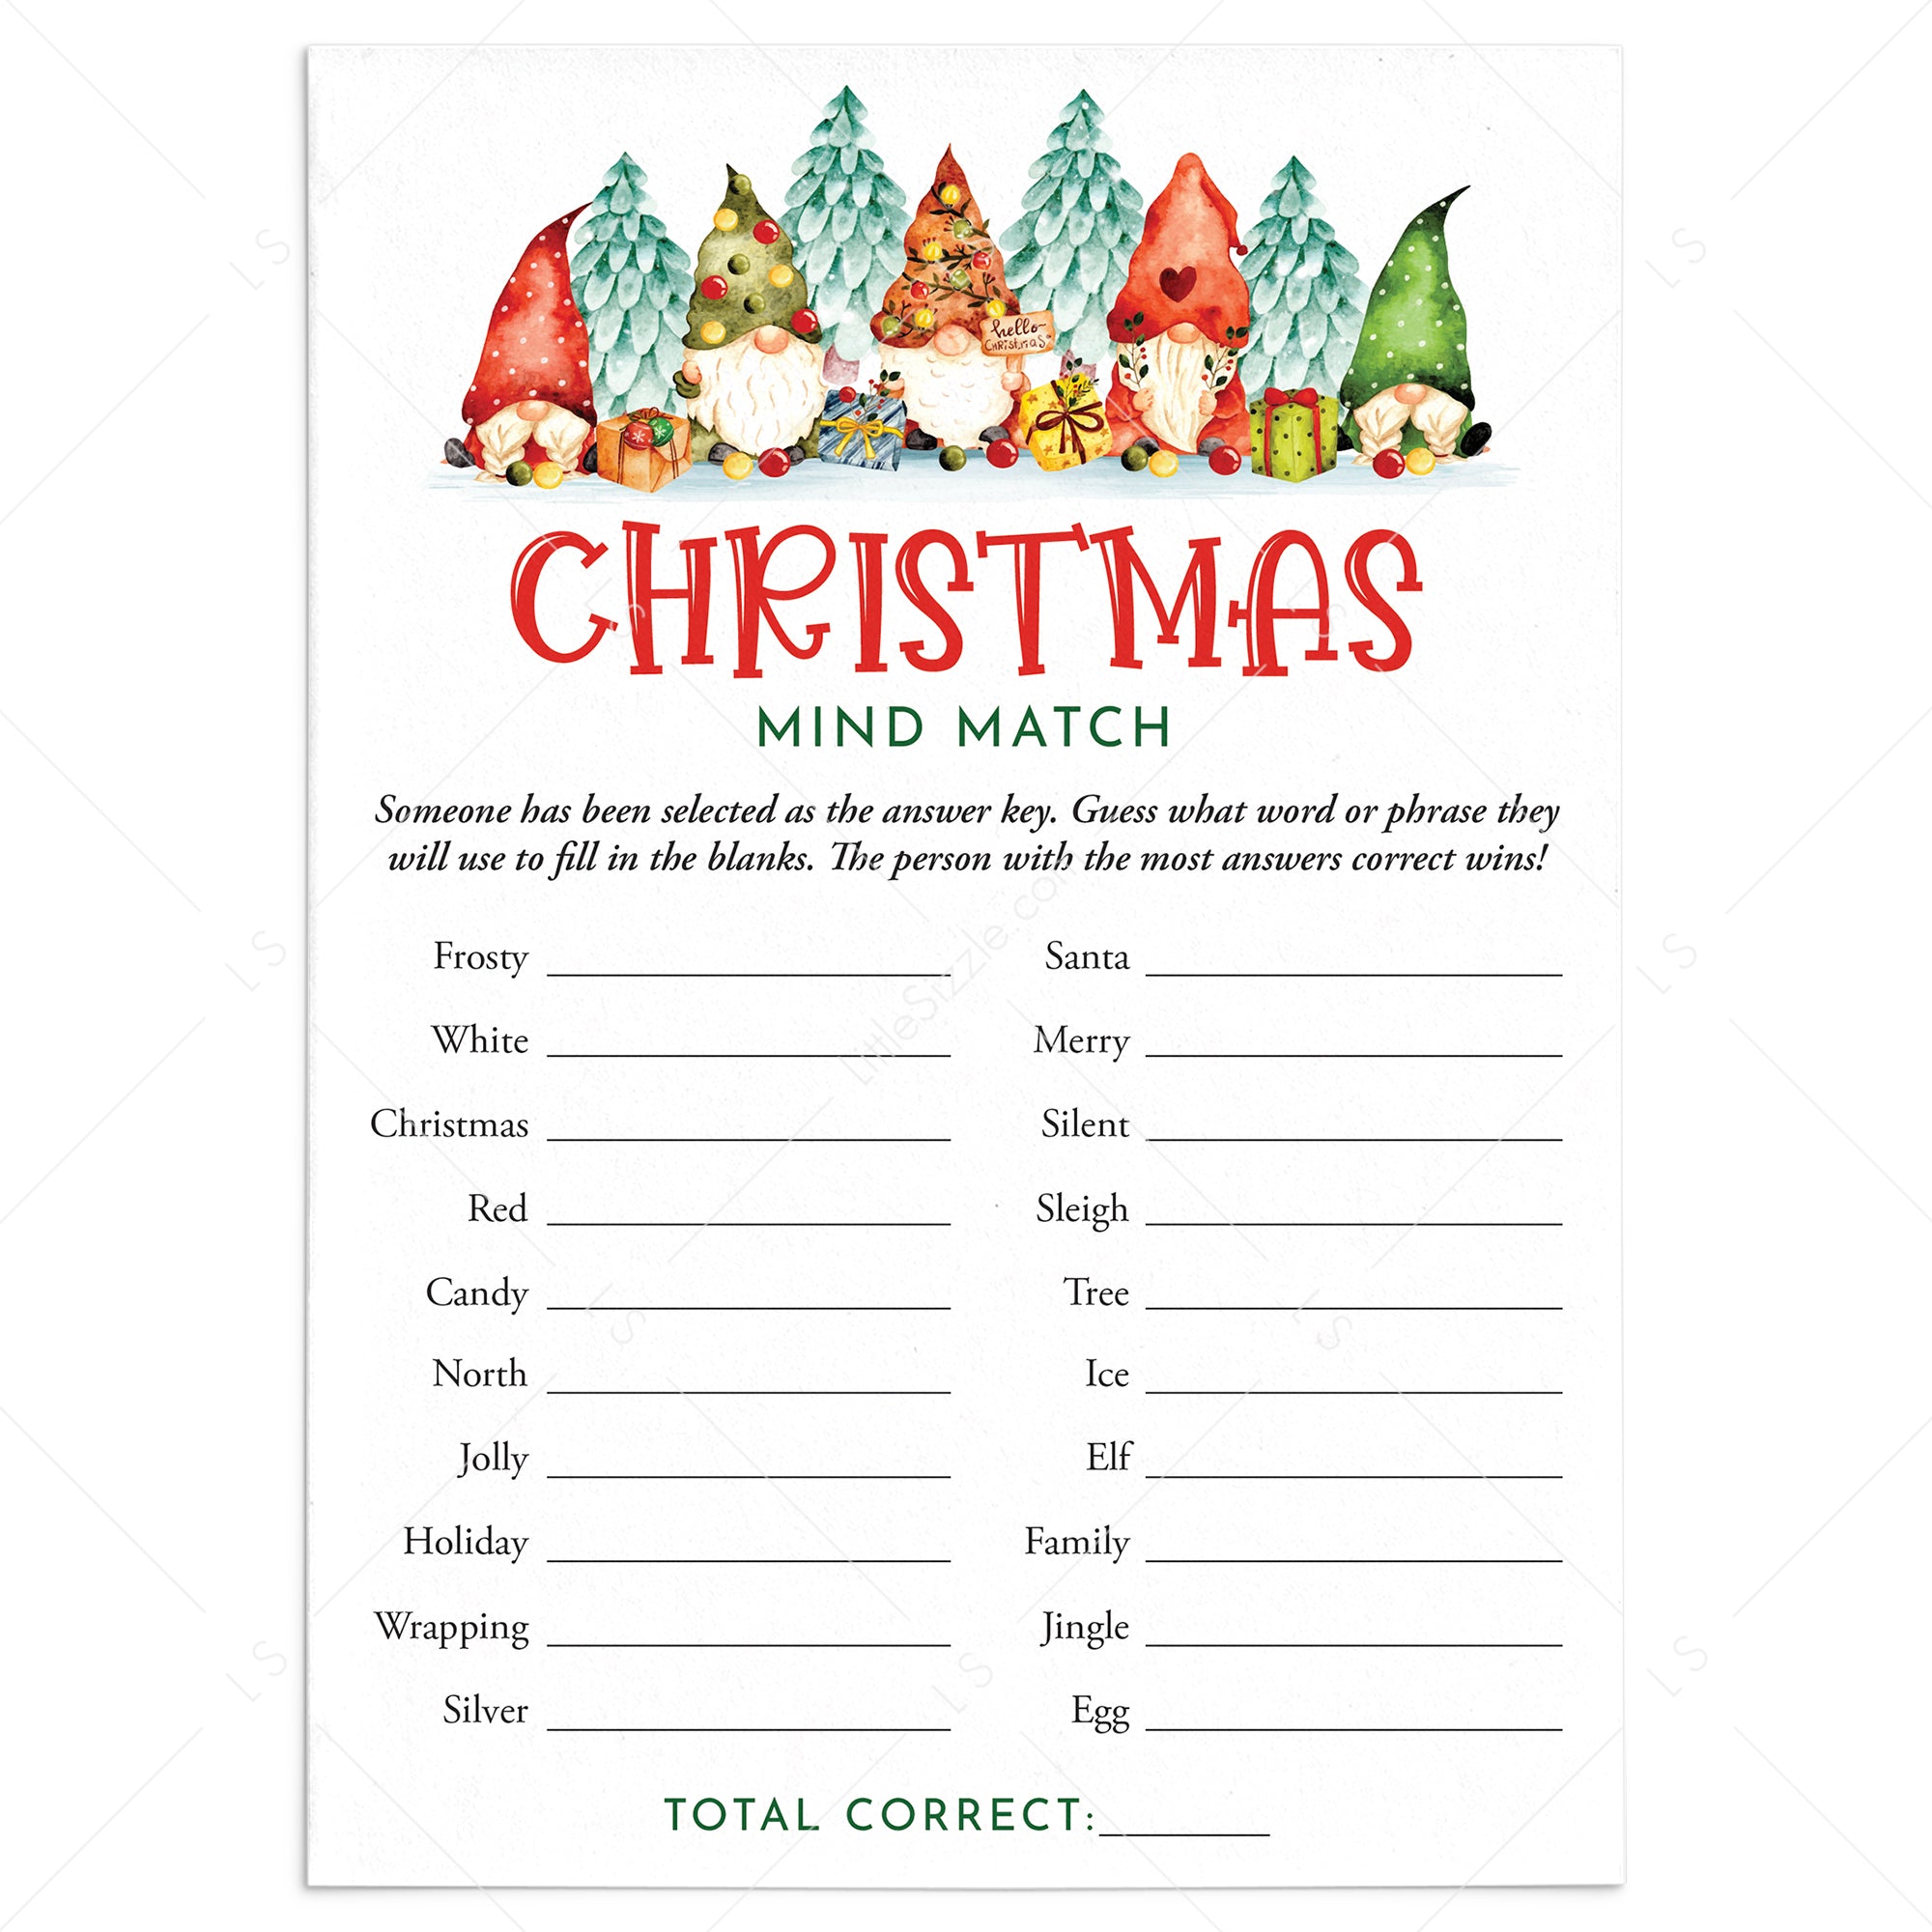 Printable Christmas Party Ice Breaker Game Mind Match by LittleSizzle